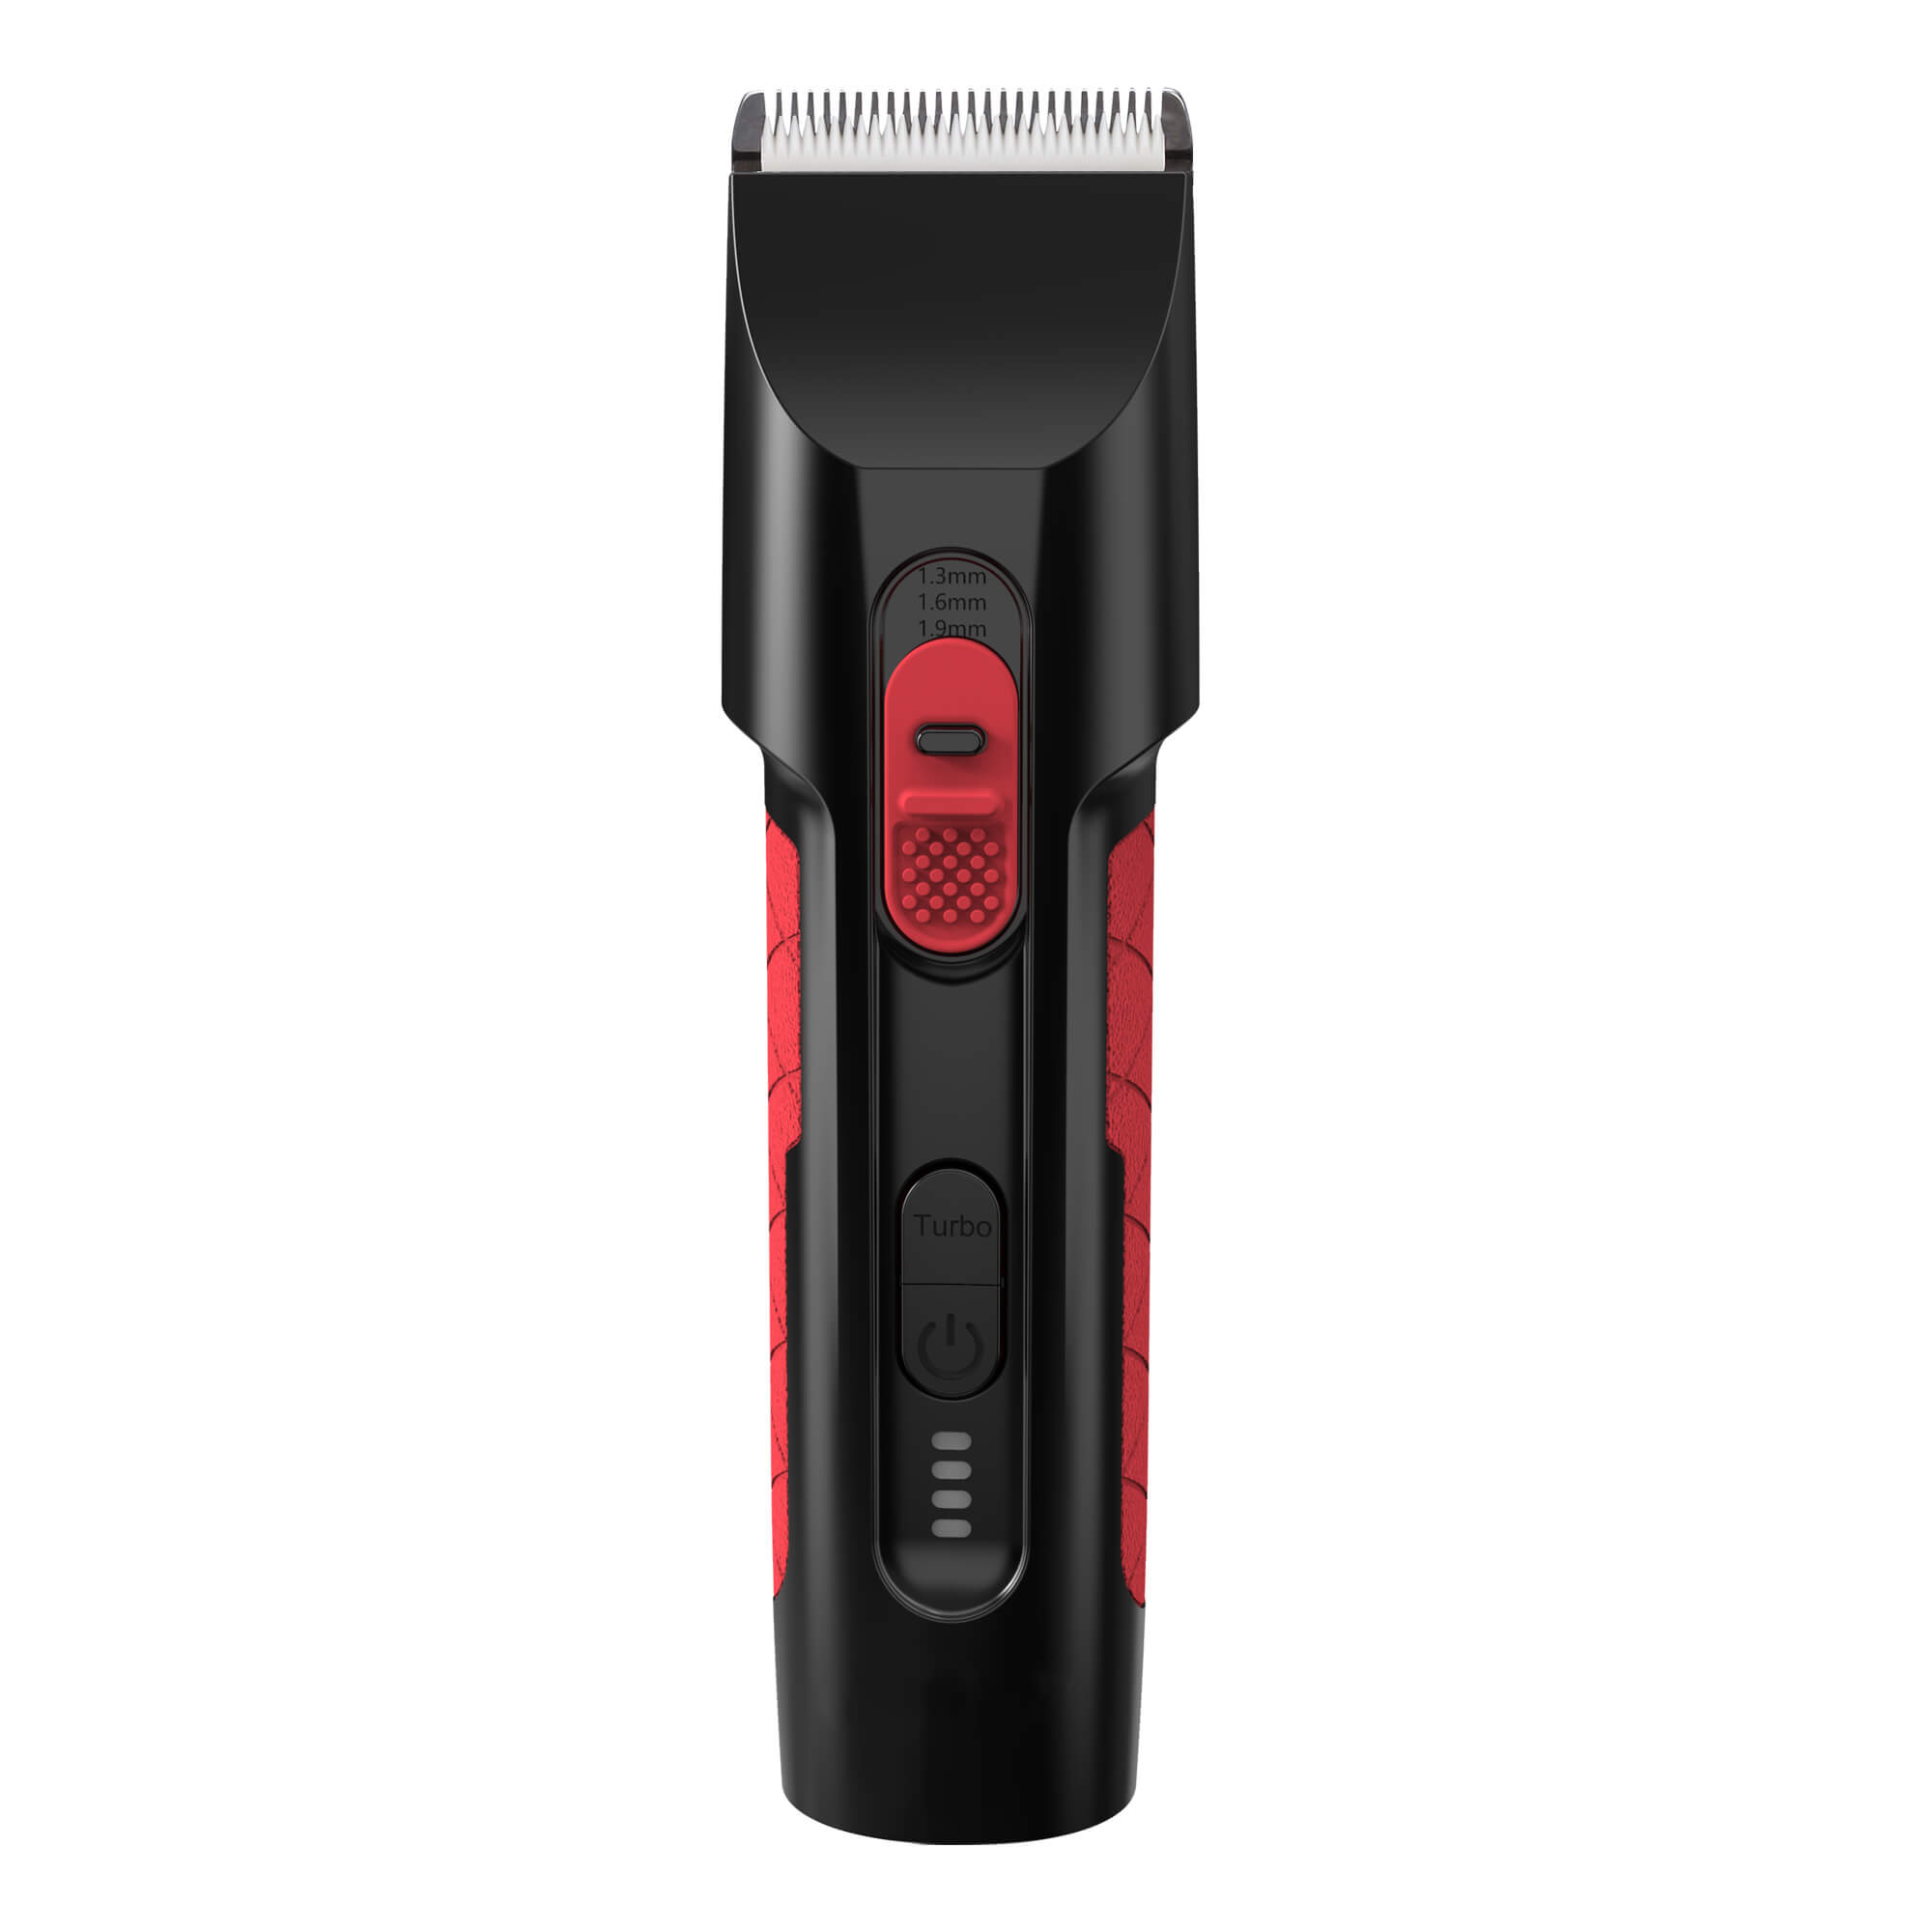 Petwant Wireless USB Rechargeable Low-noise Dog Hair Remover Hair Cutter Grooming Electric Pet Hair Trimmer Clipper